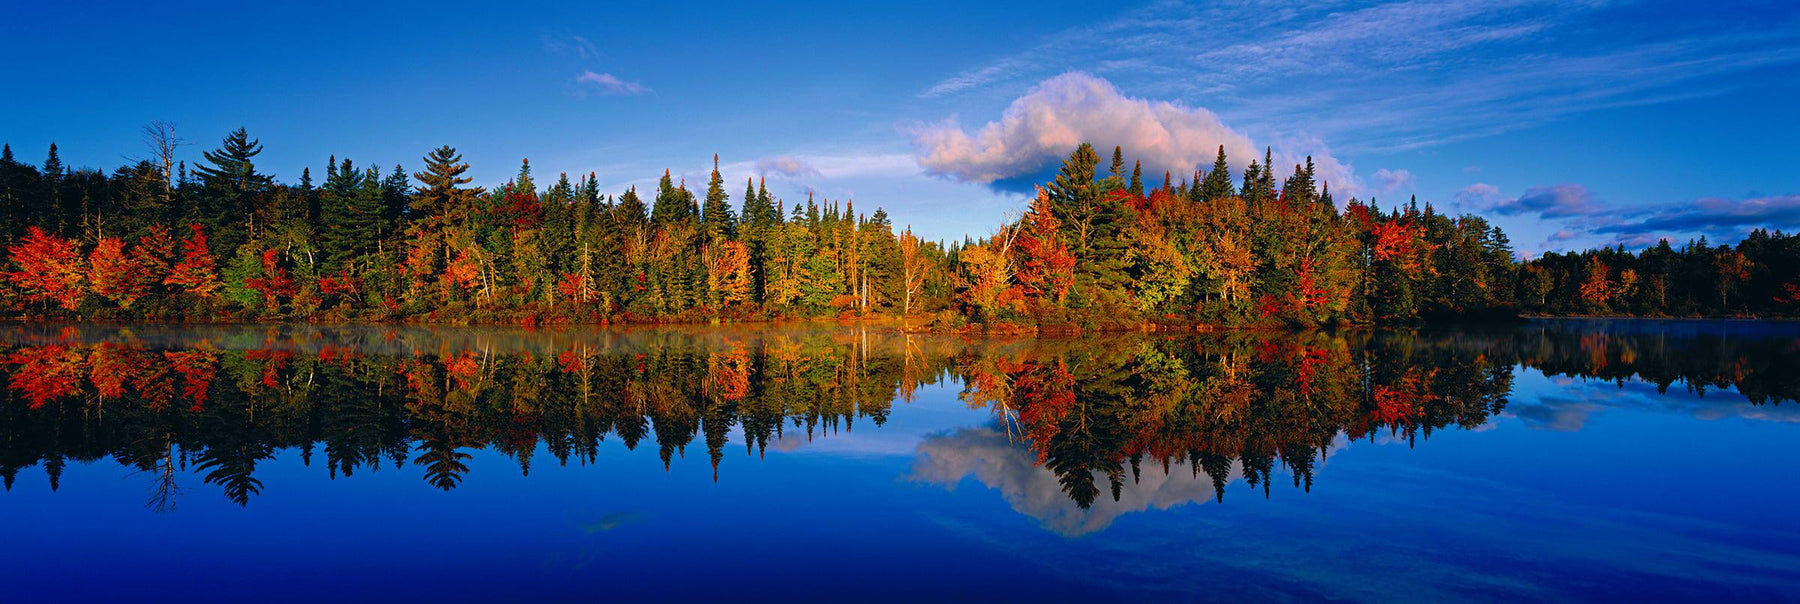 Reflections of the Autumn colored forest on the Androscoggin River New Hampshire